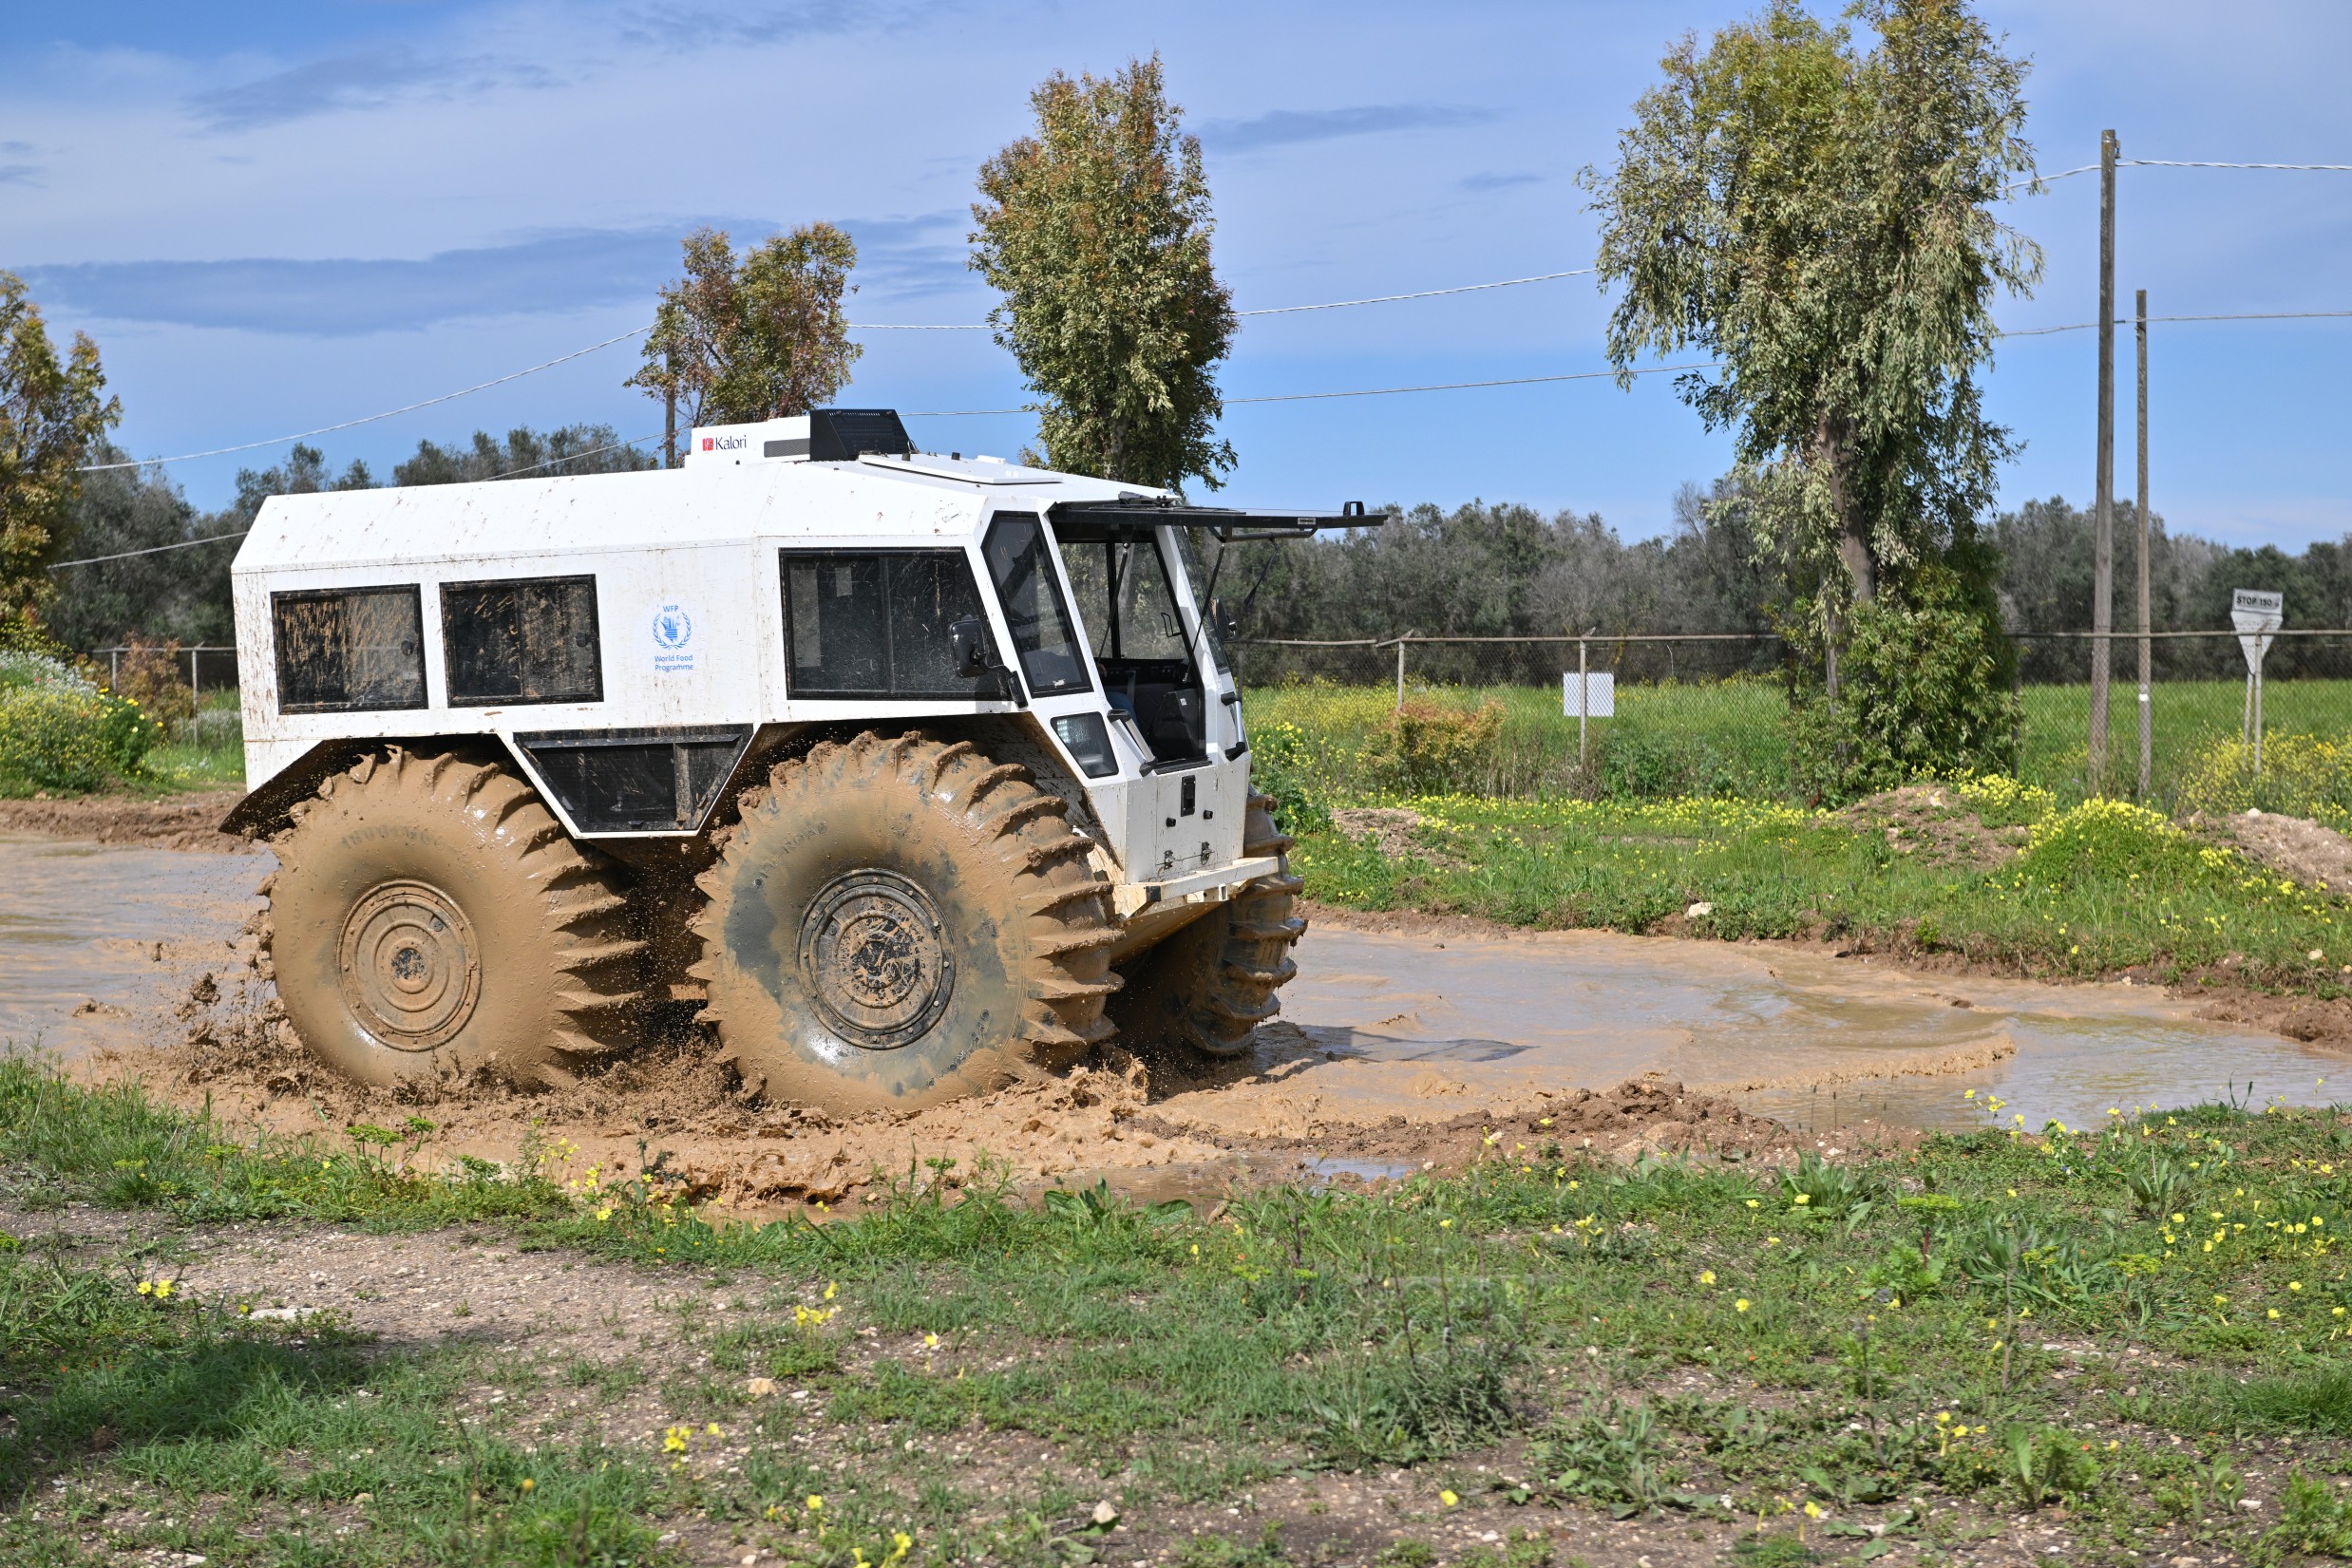 Figure 7: Seeing the SHERP in action on UNHRD Brindisi grounds. The amphibious all-terrain vehicle can float on water and is often used in hard-to-reach areas 